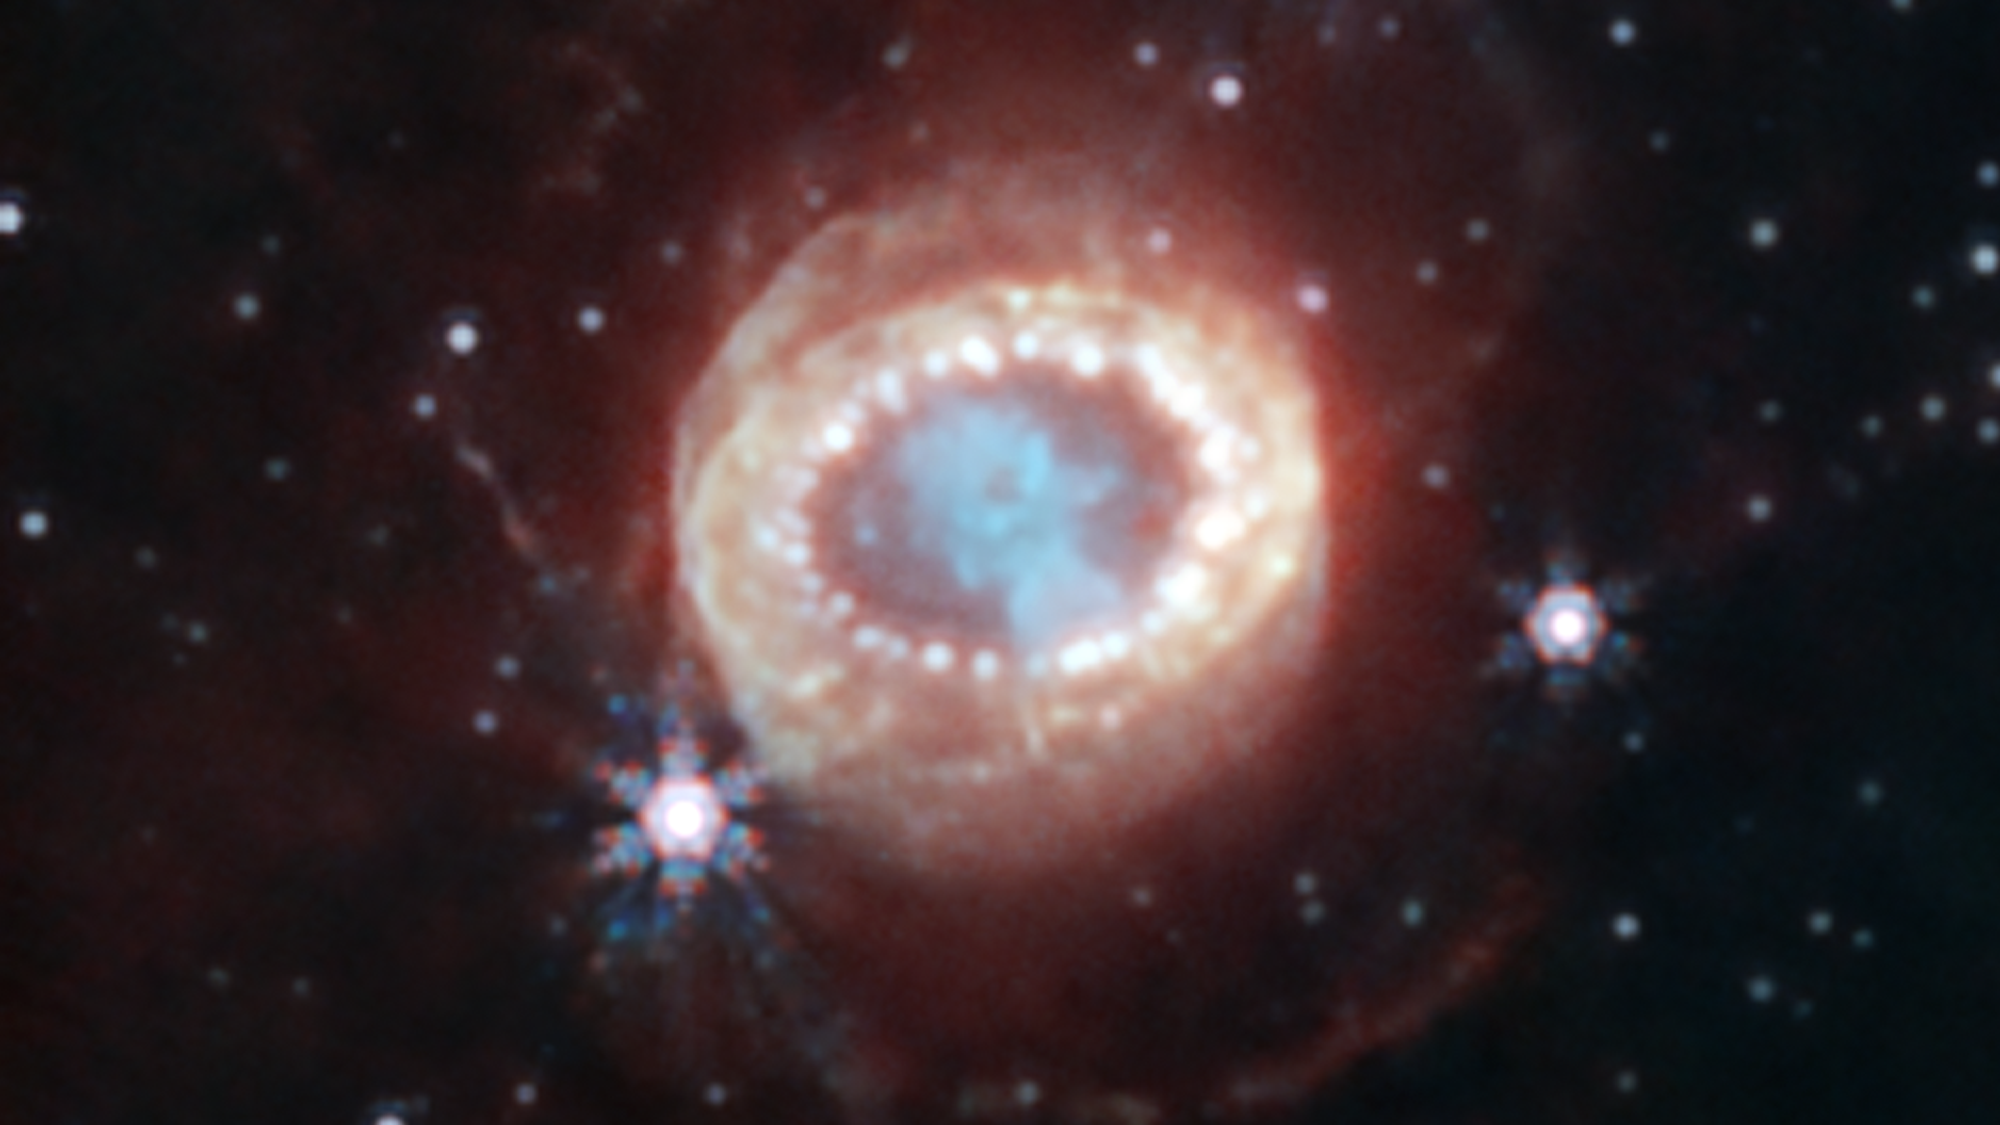 Webb’s NIRCam (Near-Infrared Camera) captured this detailed image of SN 1987A (Supernova 1987A). At the center, material ejected from the supernova forms a keyhole shape.